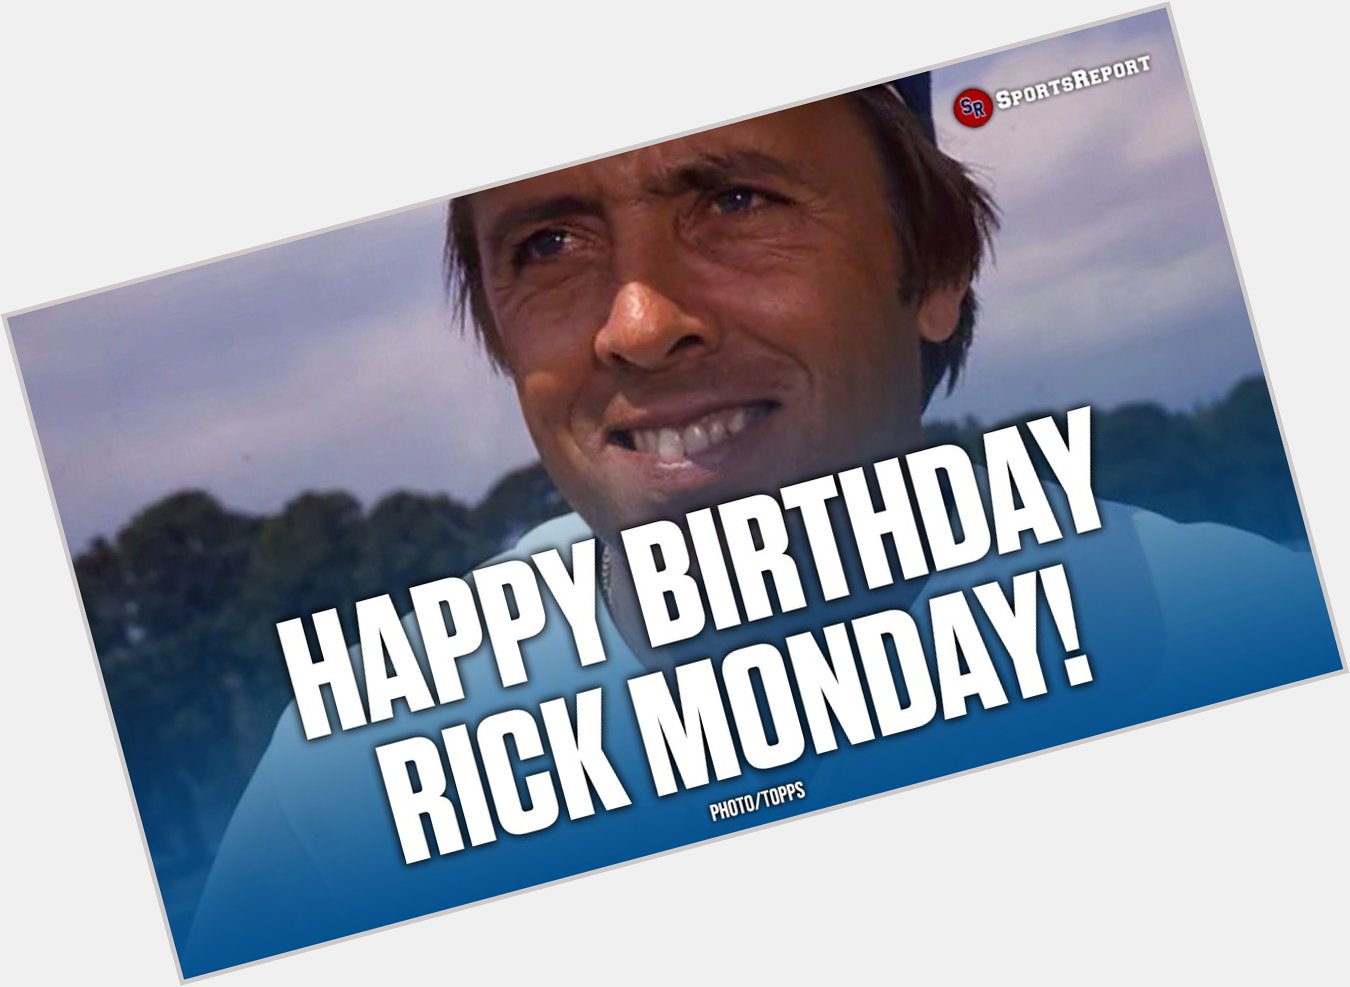  Fans, let\s wish Rick Monday a Happy Birthday! GO DODGERS!! 